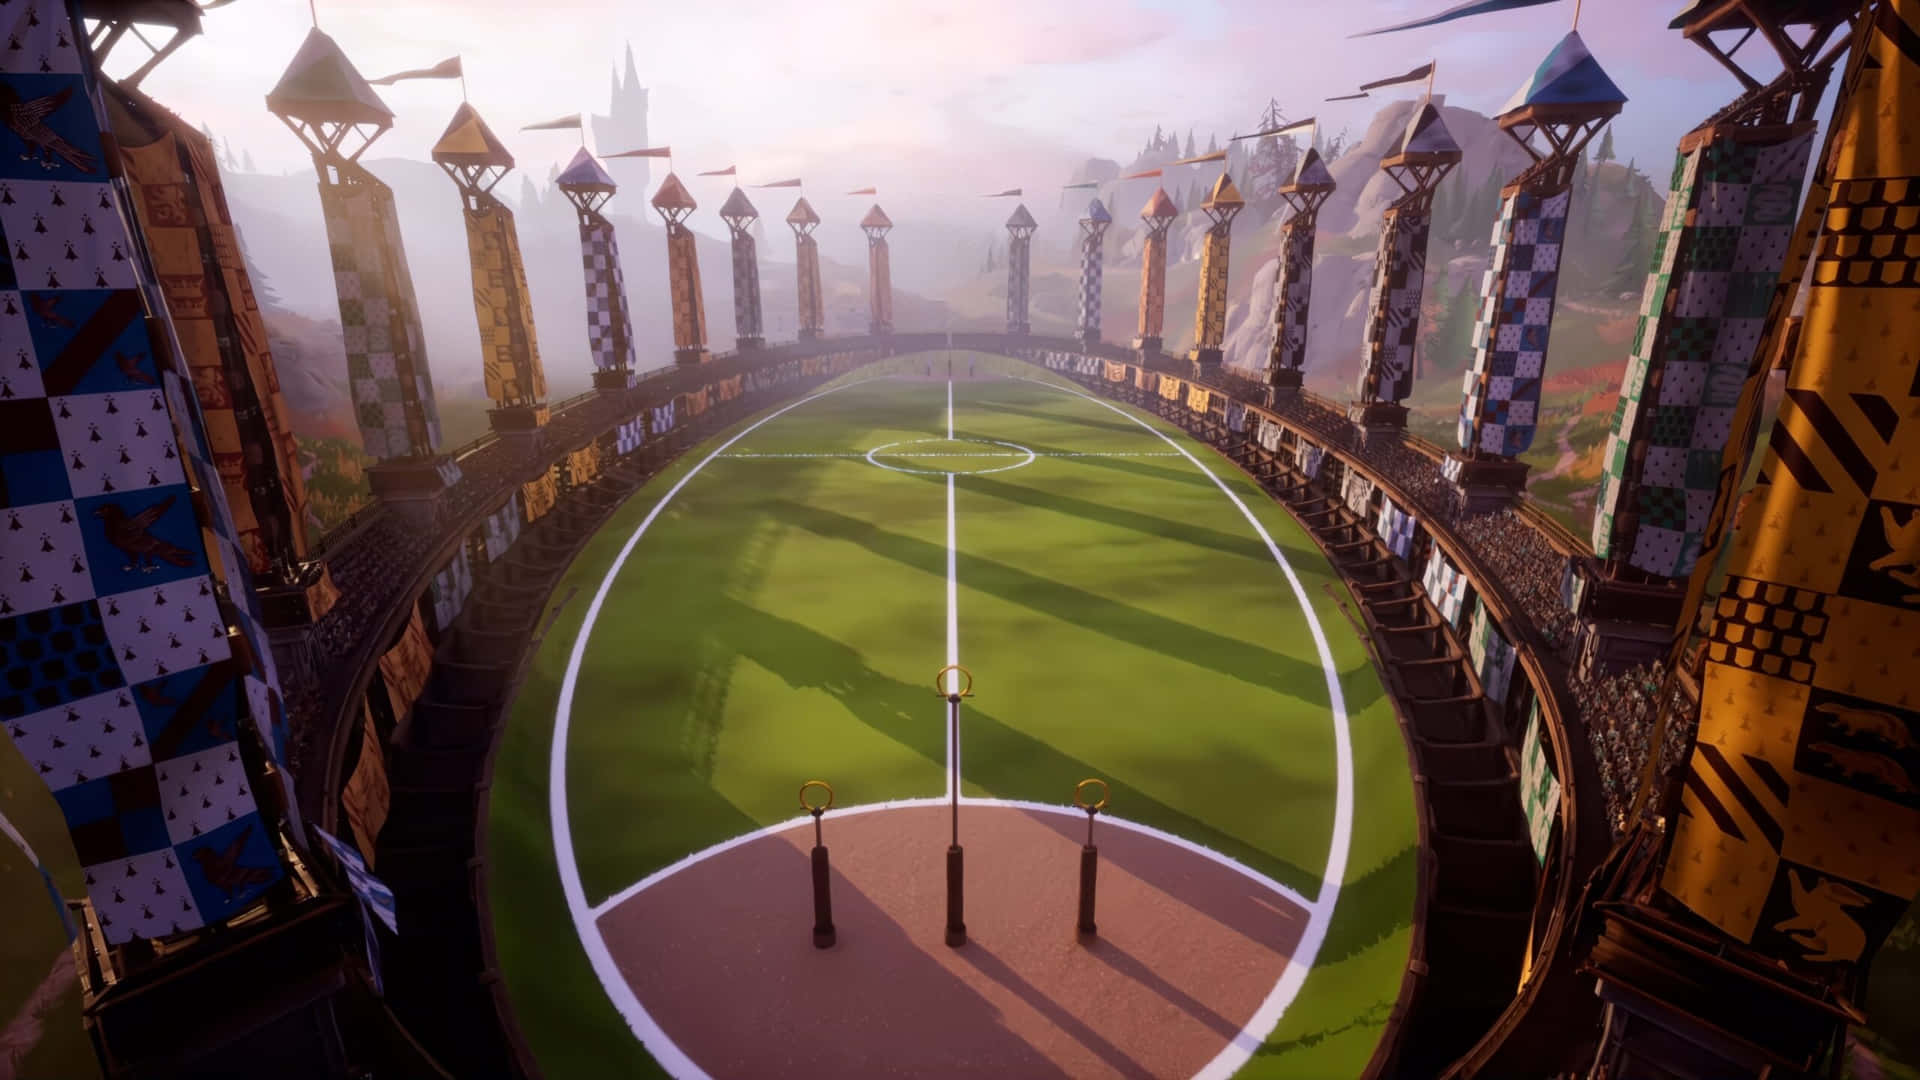 The Wizarding World of Hogwarts Quidditch Pitch" Wallpaper